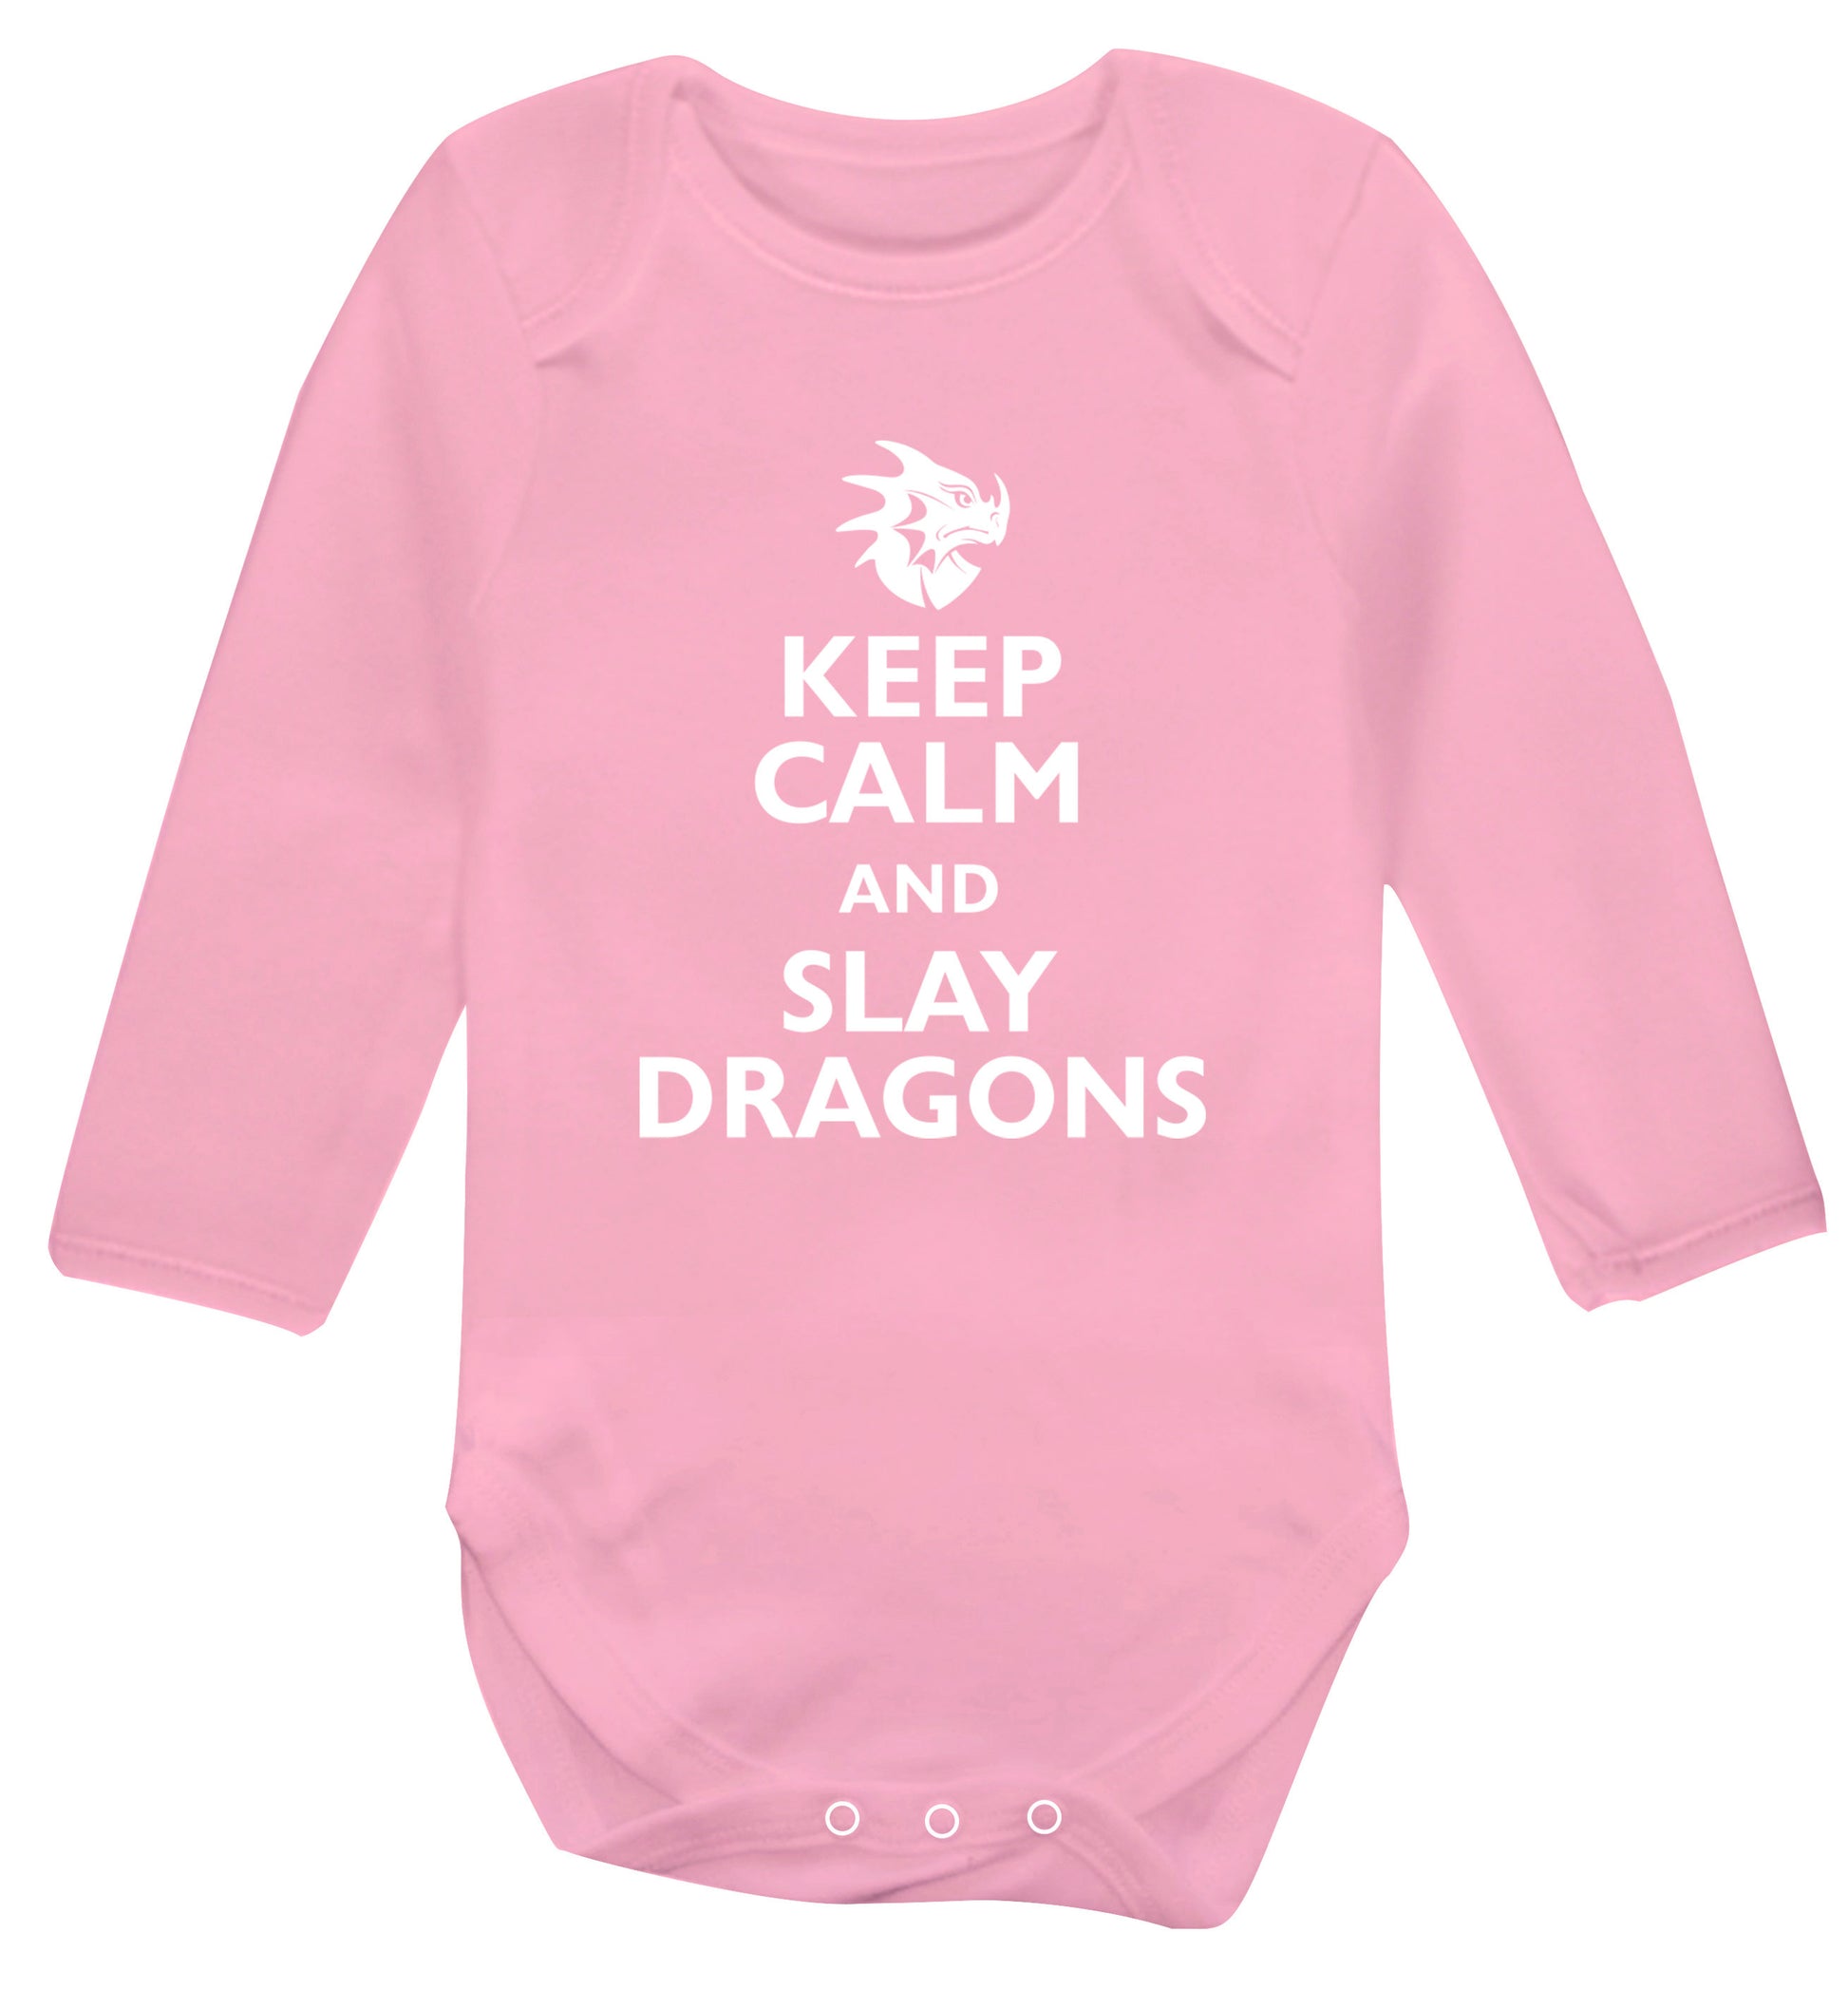 Keep calm and slay dragons Baby Vest long sleeved pale pink 6-12 months